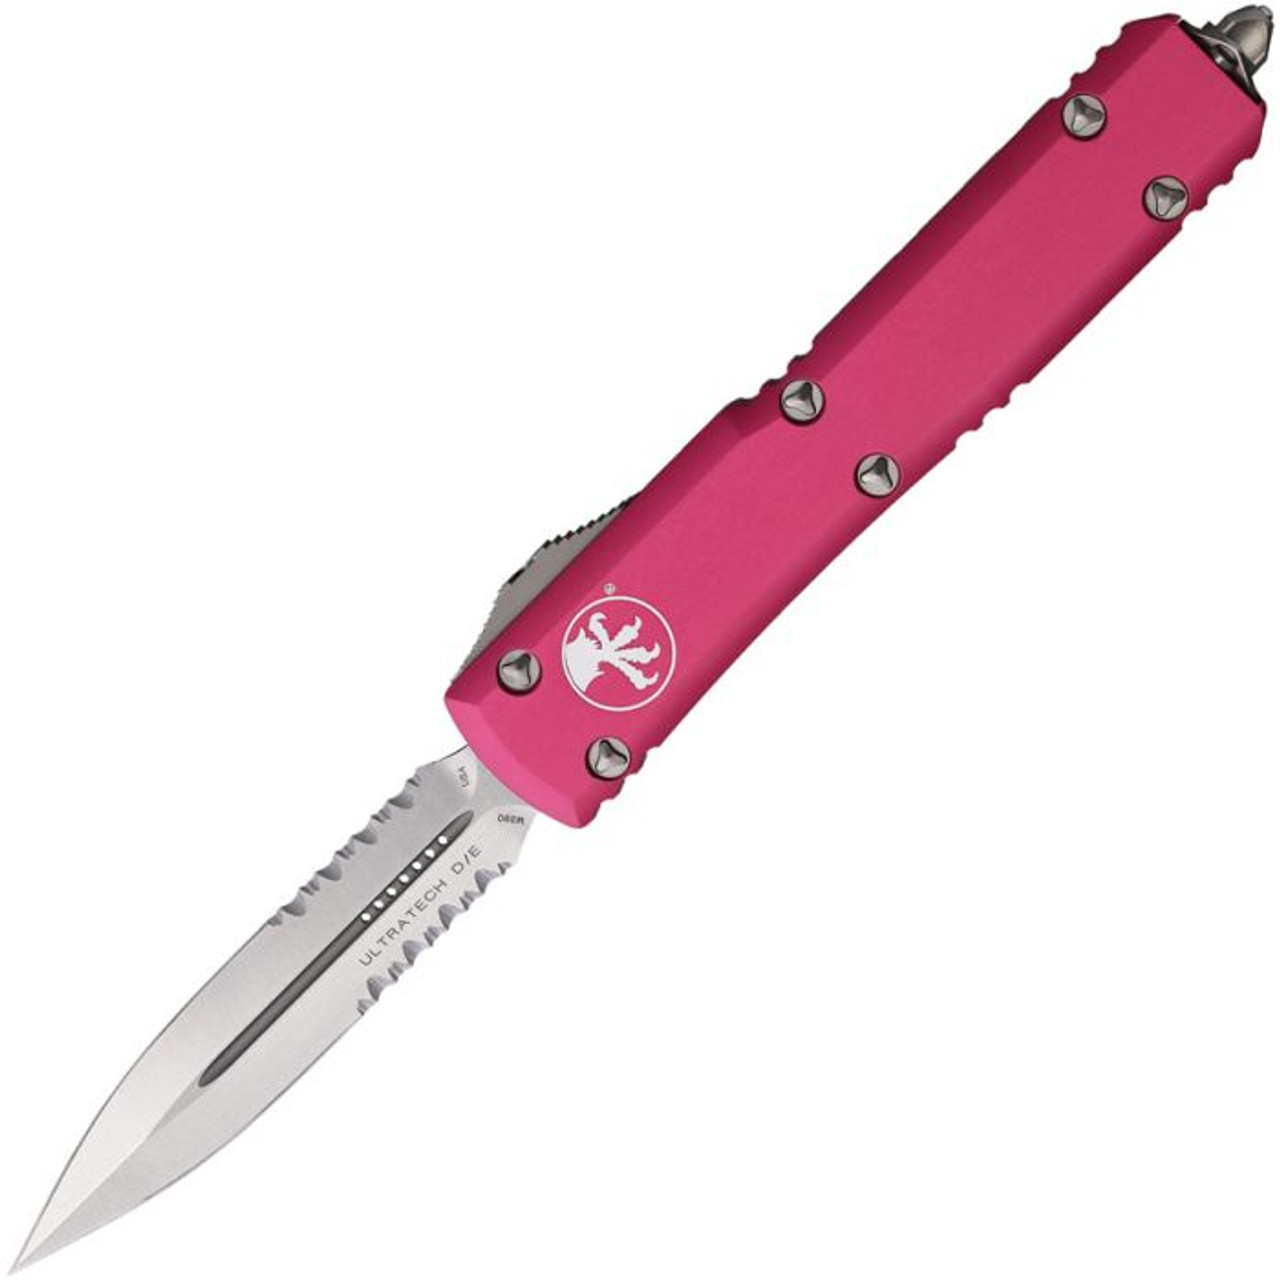 Microtech Ultratech D/E (MCT12211PK) 3.5" Bohler M390 Stonewashed Double Edged Dagger Partially Serrated Blade, Pink Anodized Aluminum